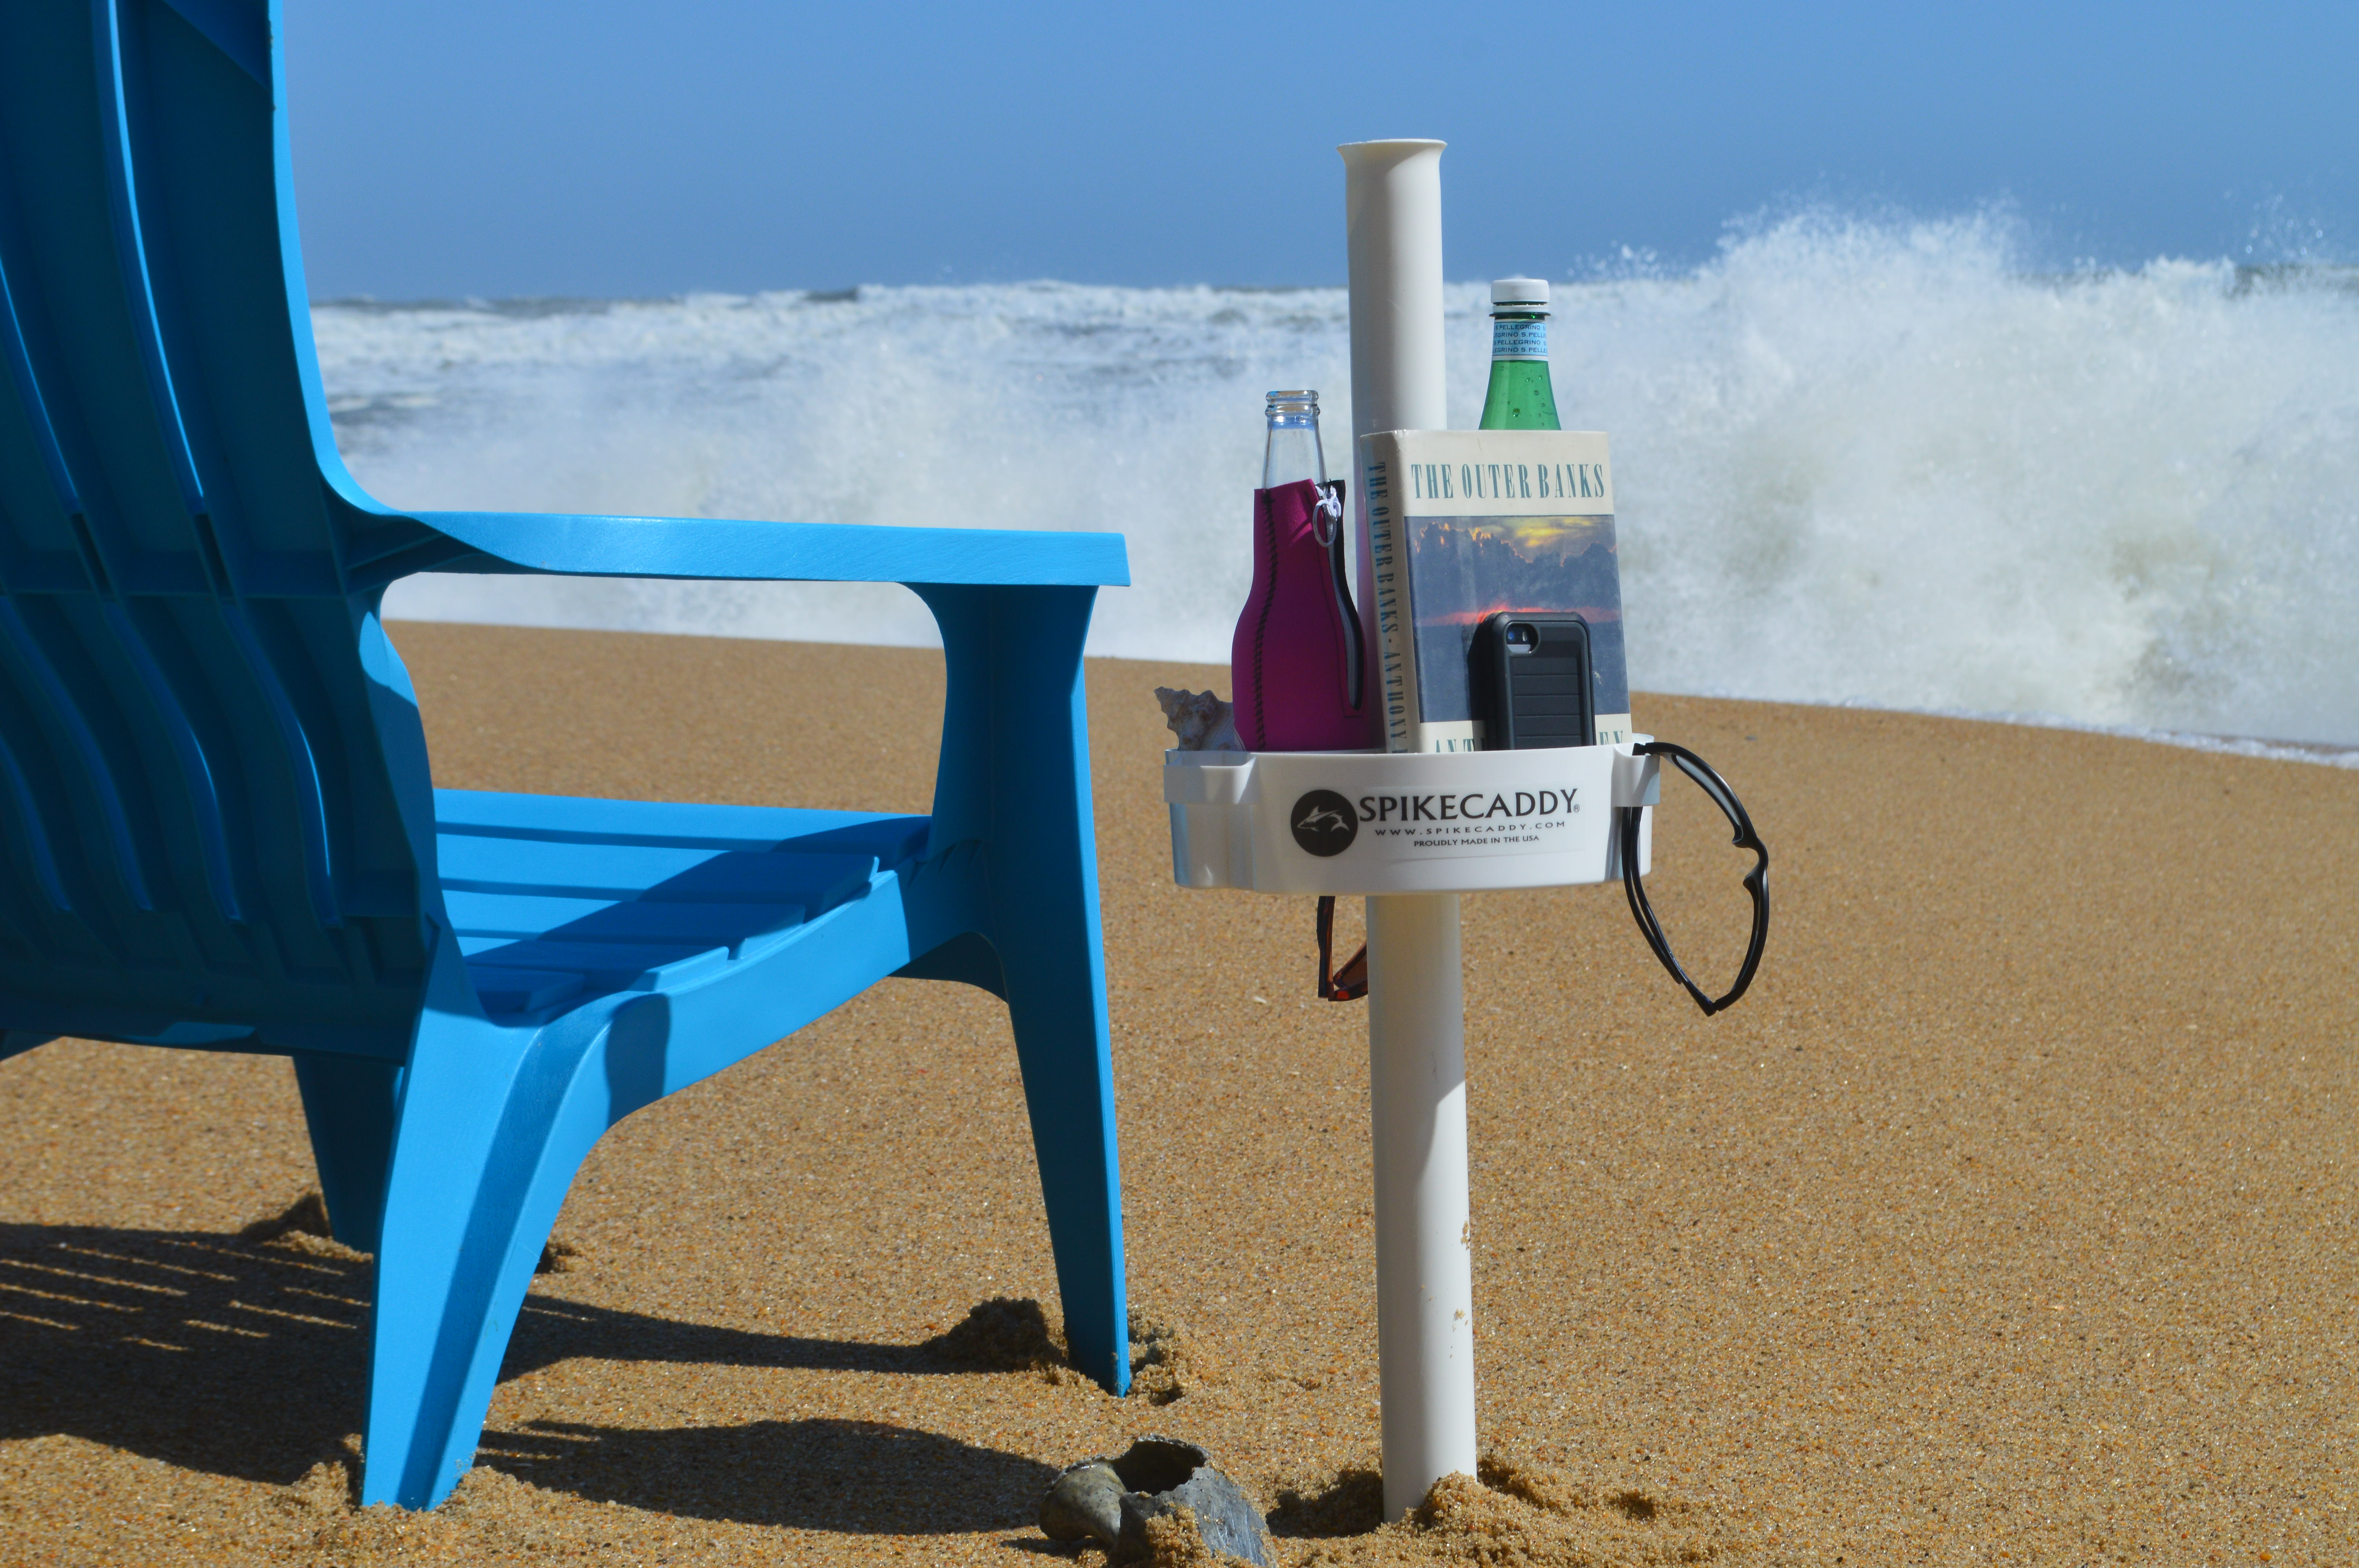 SPIKECADDY will keep you beverages and accessories out of the sand and salt water!